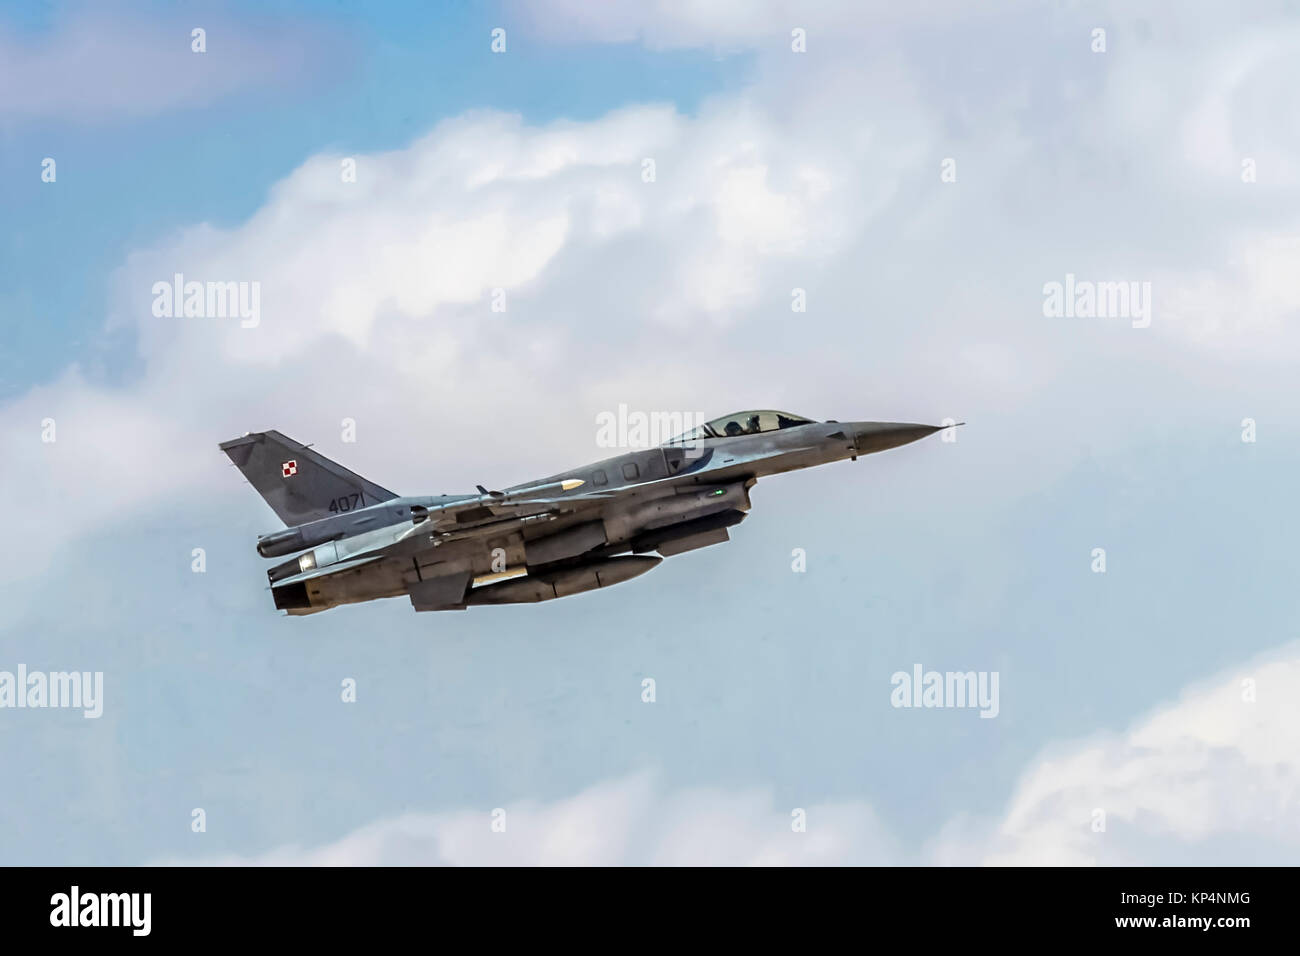 Polish Air Force General Dynamics F-16 Block 52+ in flight.  Photographed at the  “Blue-Flag” 2017, an international aerial training exercise hosted b Stock Photo